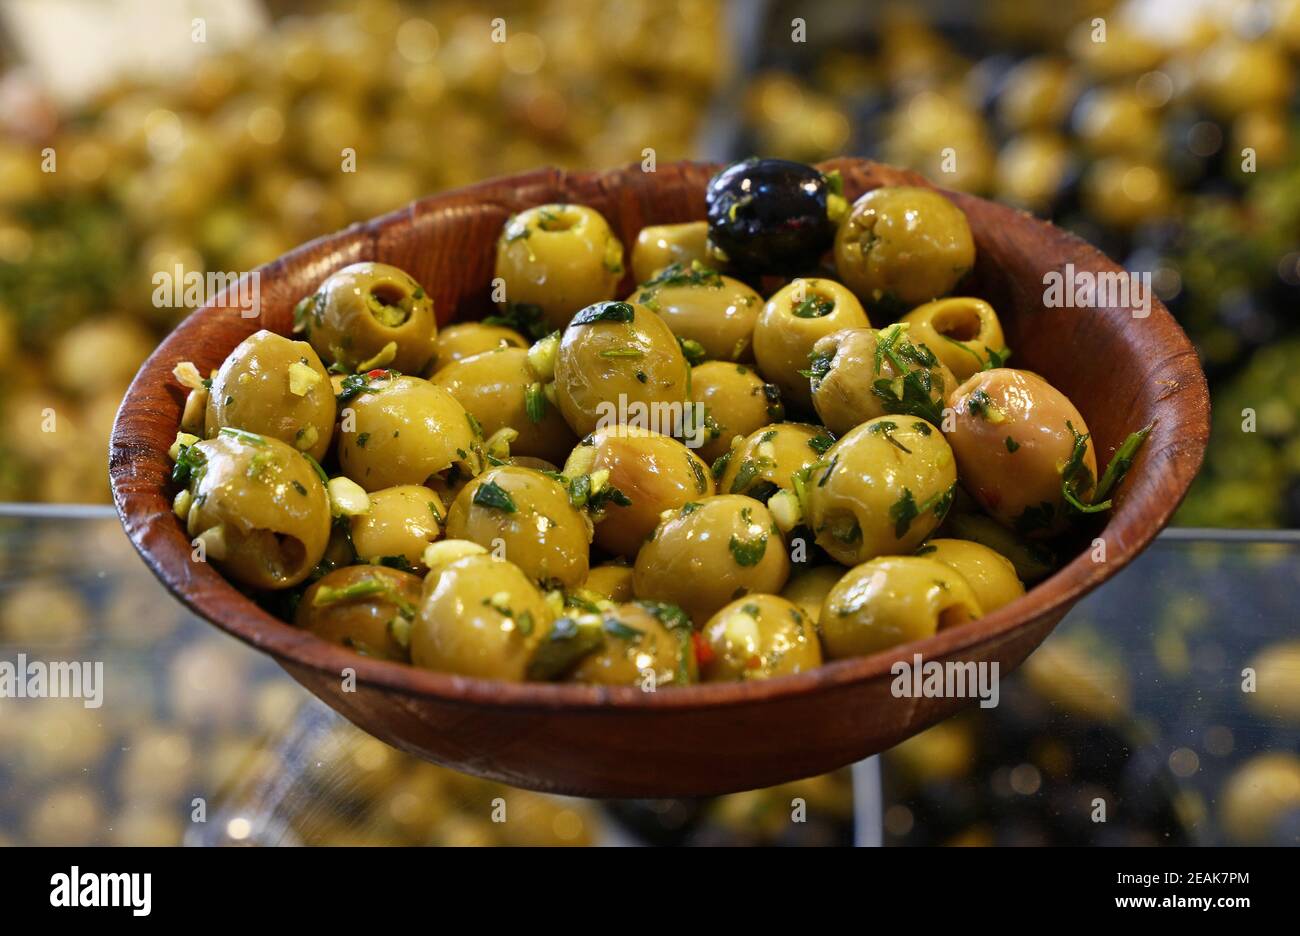 Green olives in wooden bowl on retail display Stock Photo